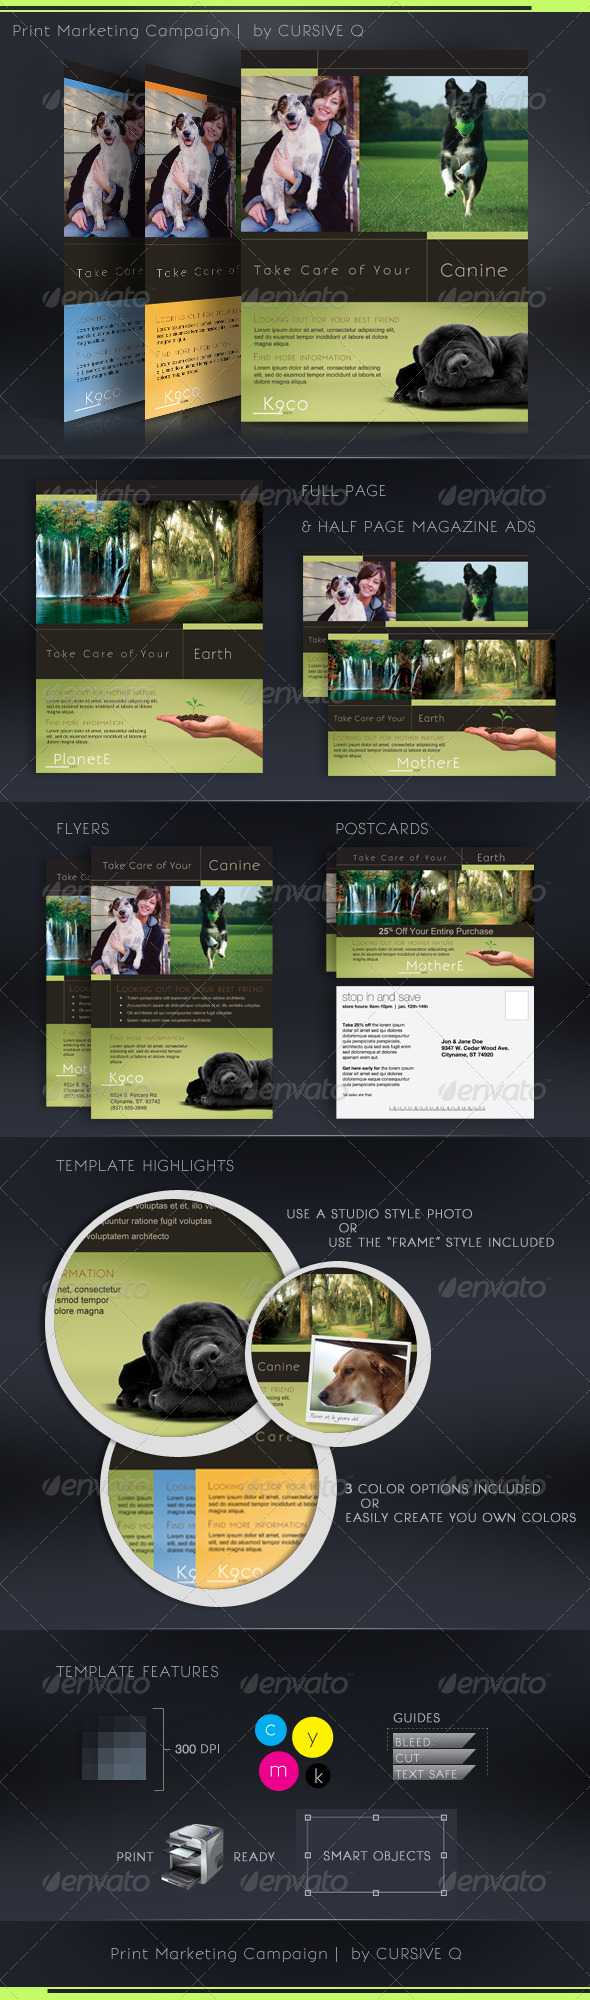 Easy Ads Magazine Graphics, Designs & Templates Throughout Magazine Ad Template Word